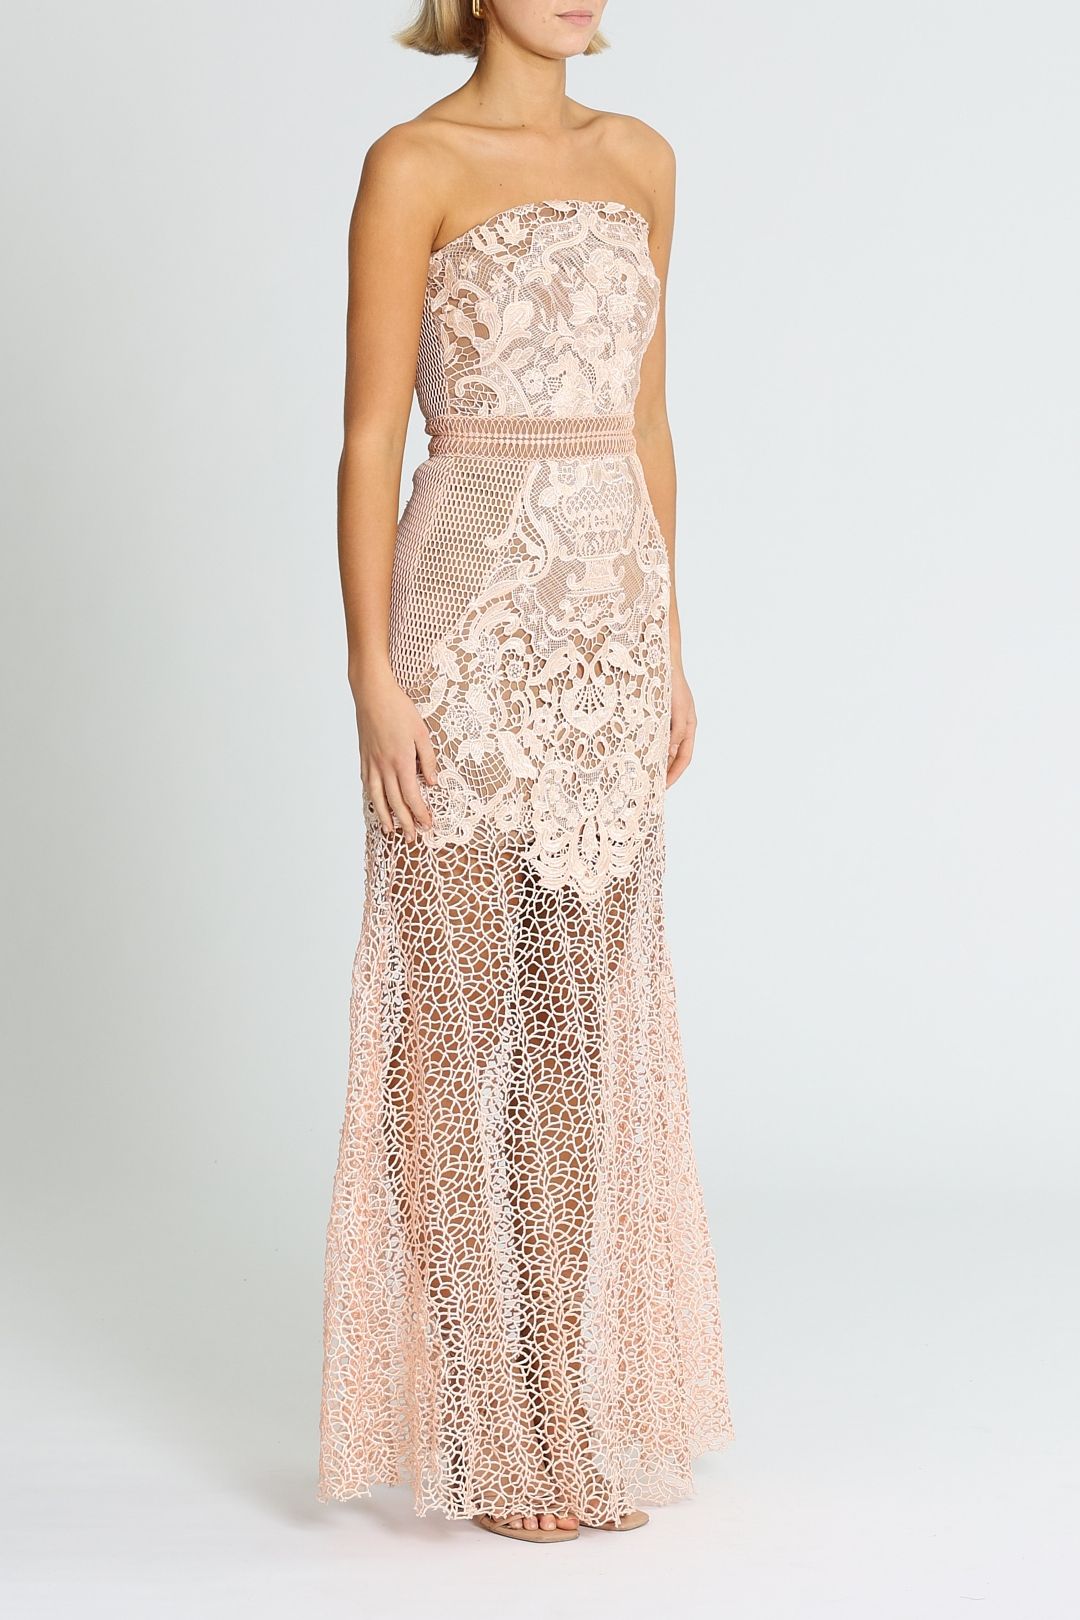 Grace & Hart Adele Gown Blush Strapless